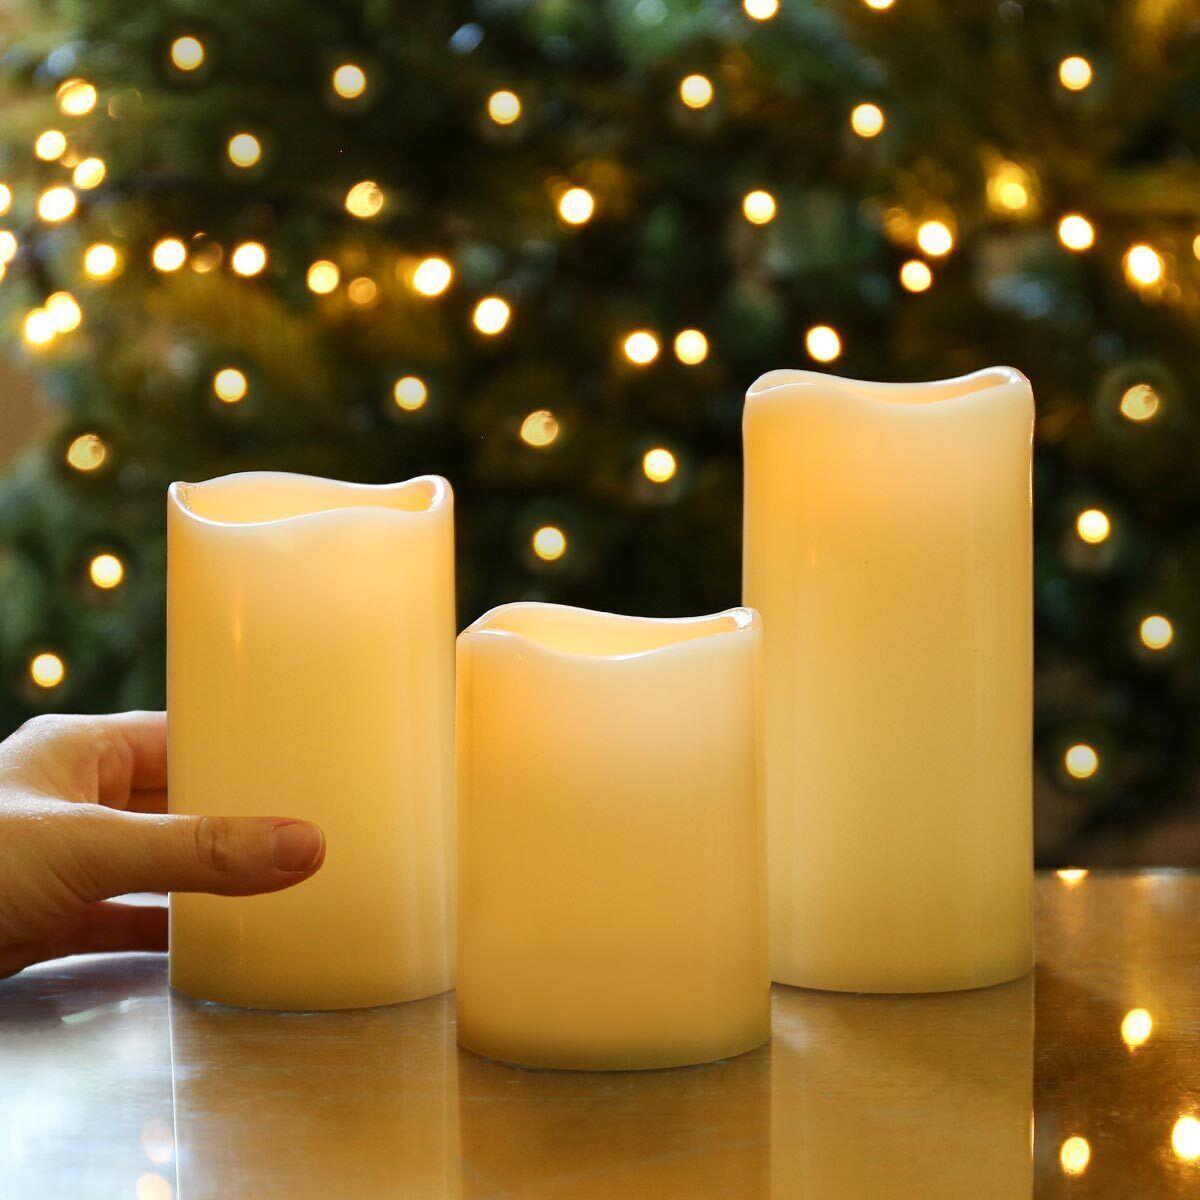 3 Pcs Outdoor LED Candle Light by Geezy - The Magic Toy Shop